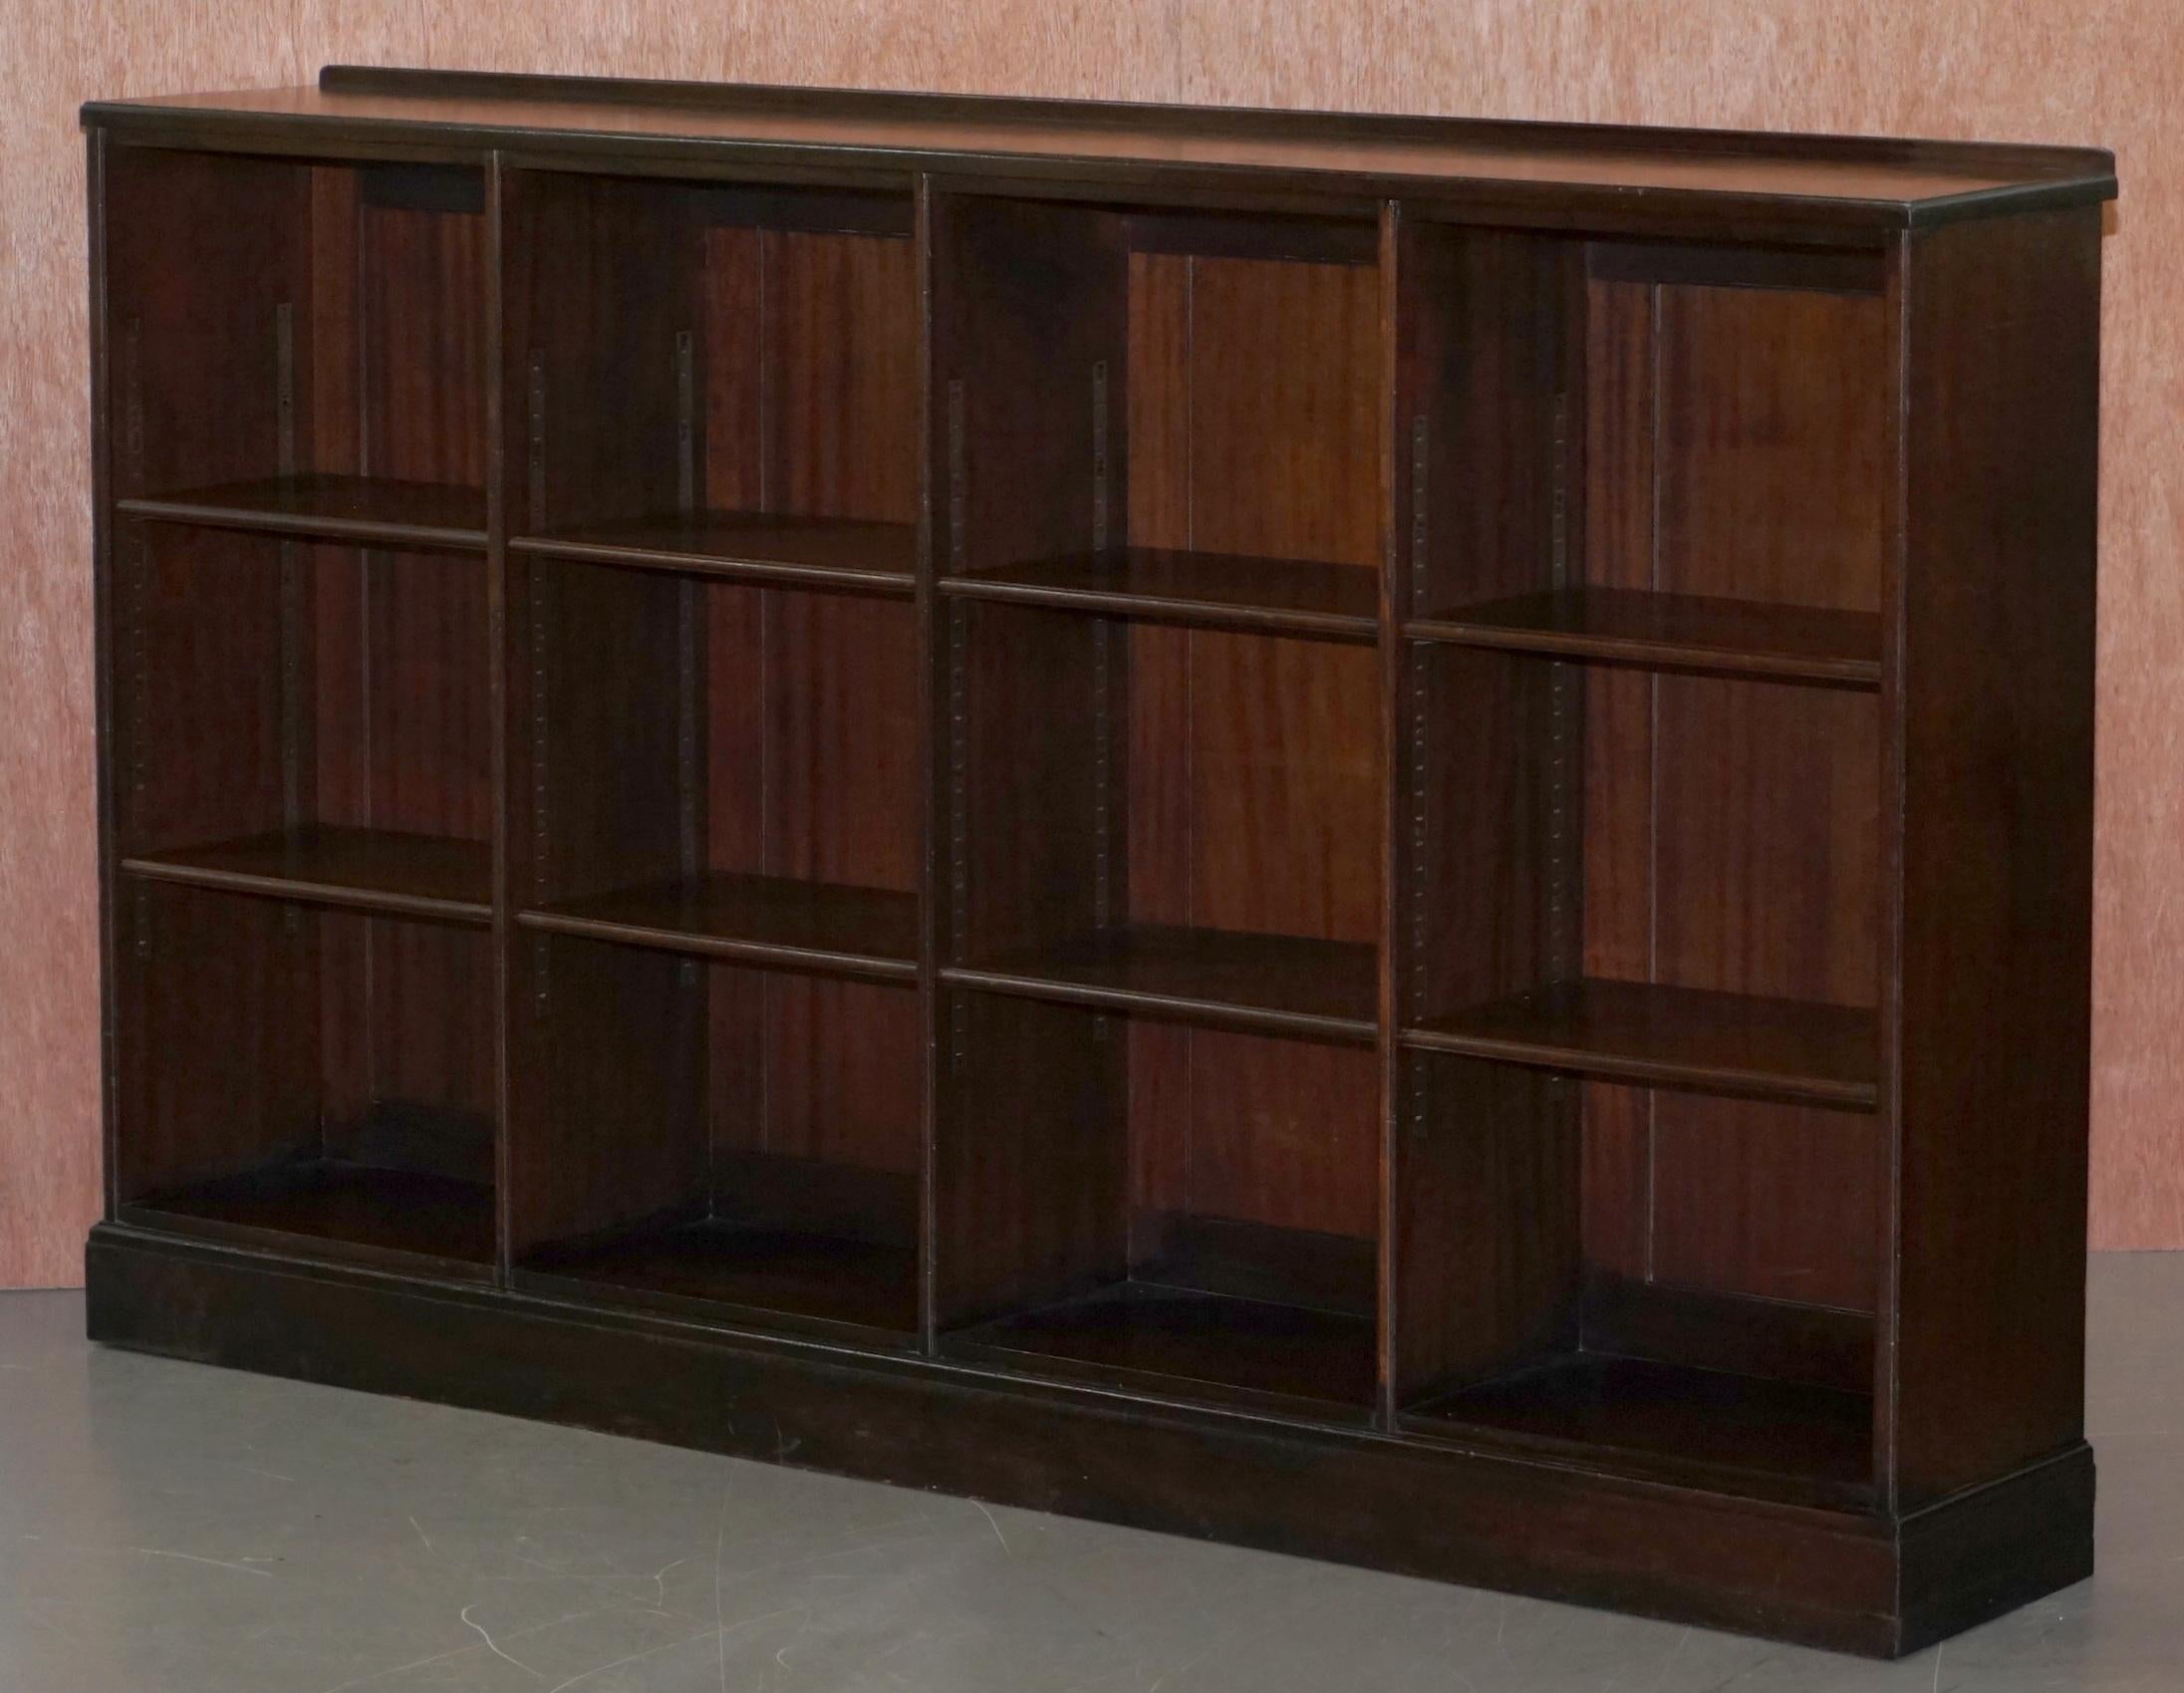 We are delighted to offer for sale this stunning pair of original circa 1910 Whytock & Reid of Edinburgh EST 1807 library bookcases

A very well made pair, both with fully height adjustable and removable shelves, this are pure original library